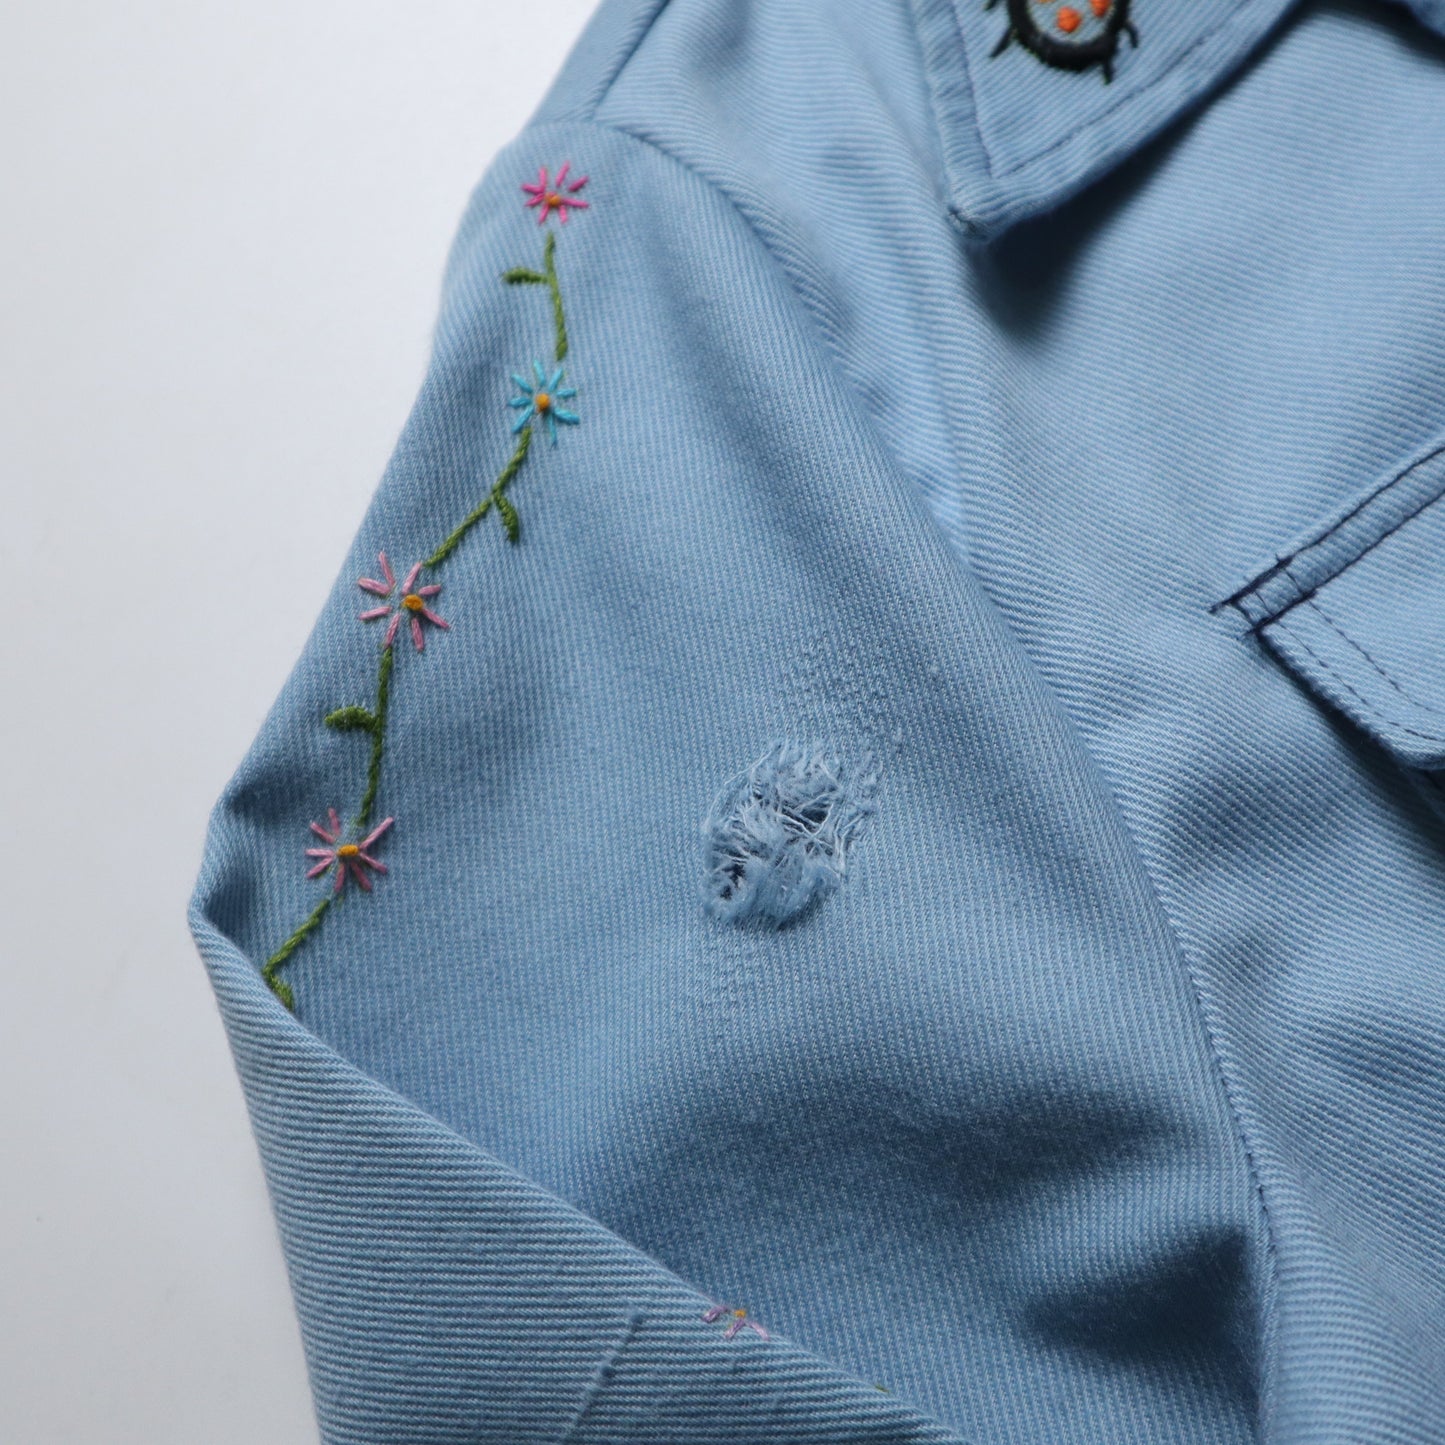 1970s American hand embroidered floral shirt